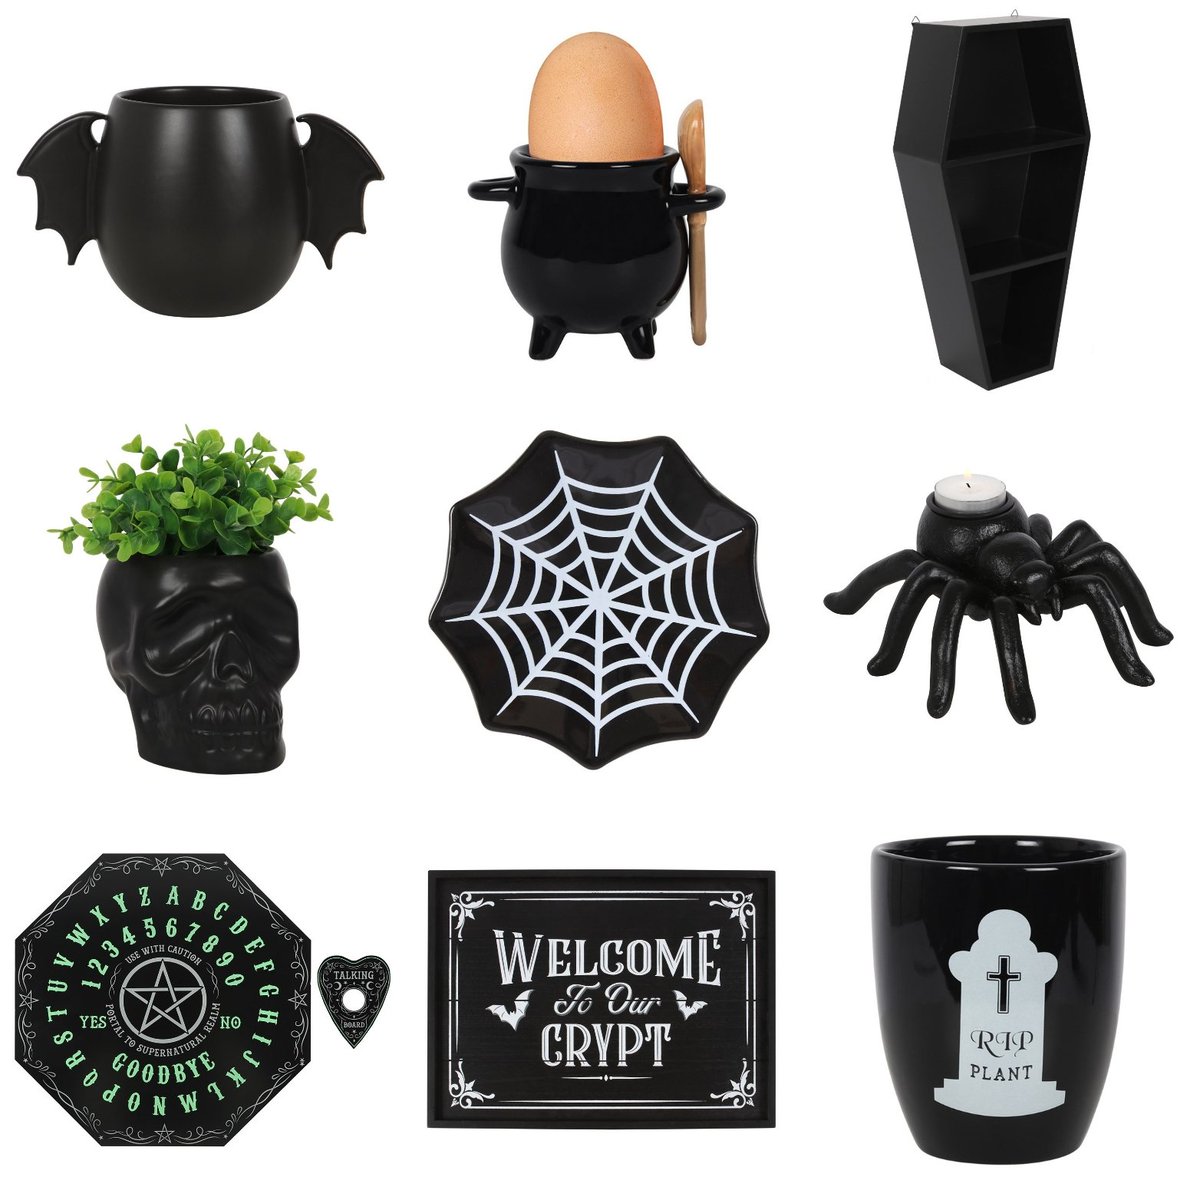 New spooky homewares arrived in store 🧟‍♂️
creepycartel.co.uk
#smallbusiness #witchgifts #horrorgift #witchvibes #witchlife #witchaesthetic #witchshop #witchystuff #witchythings #gothichomedecor #gothichomedecor #gothicstyle #spooky #spookyseason #spookycute #spookyvibes